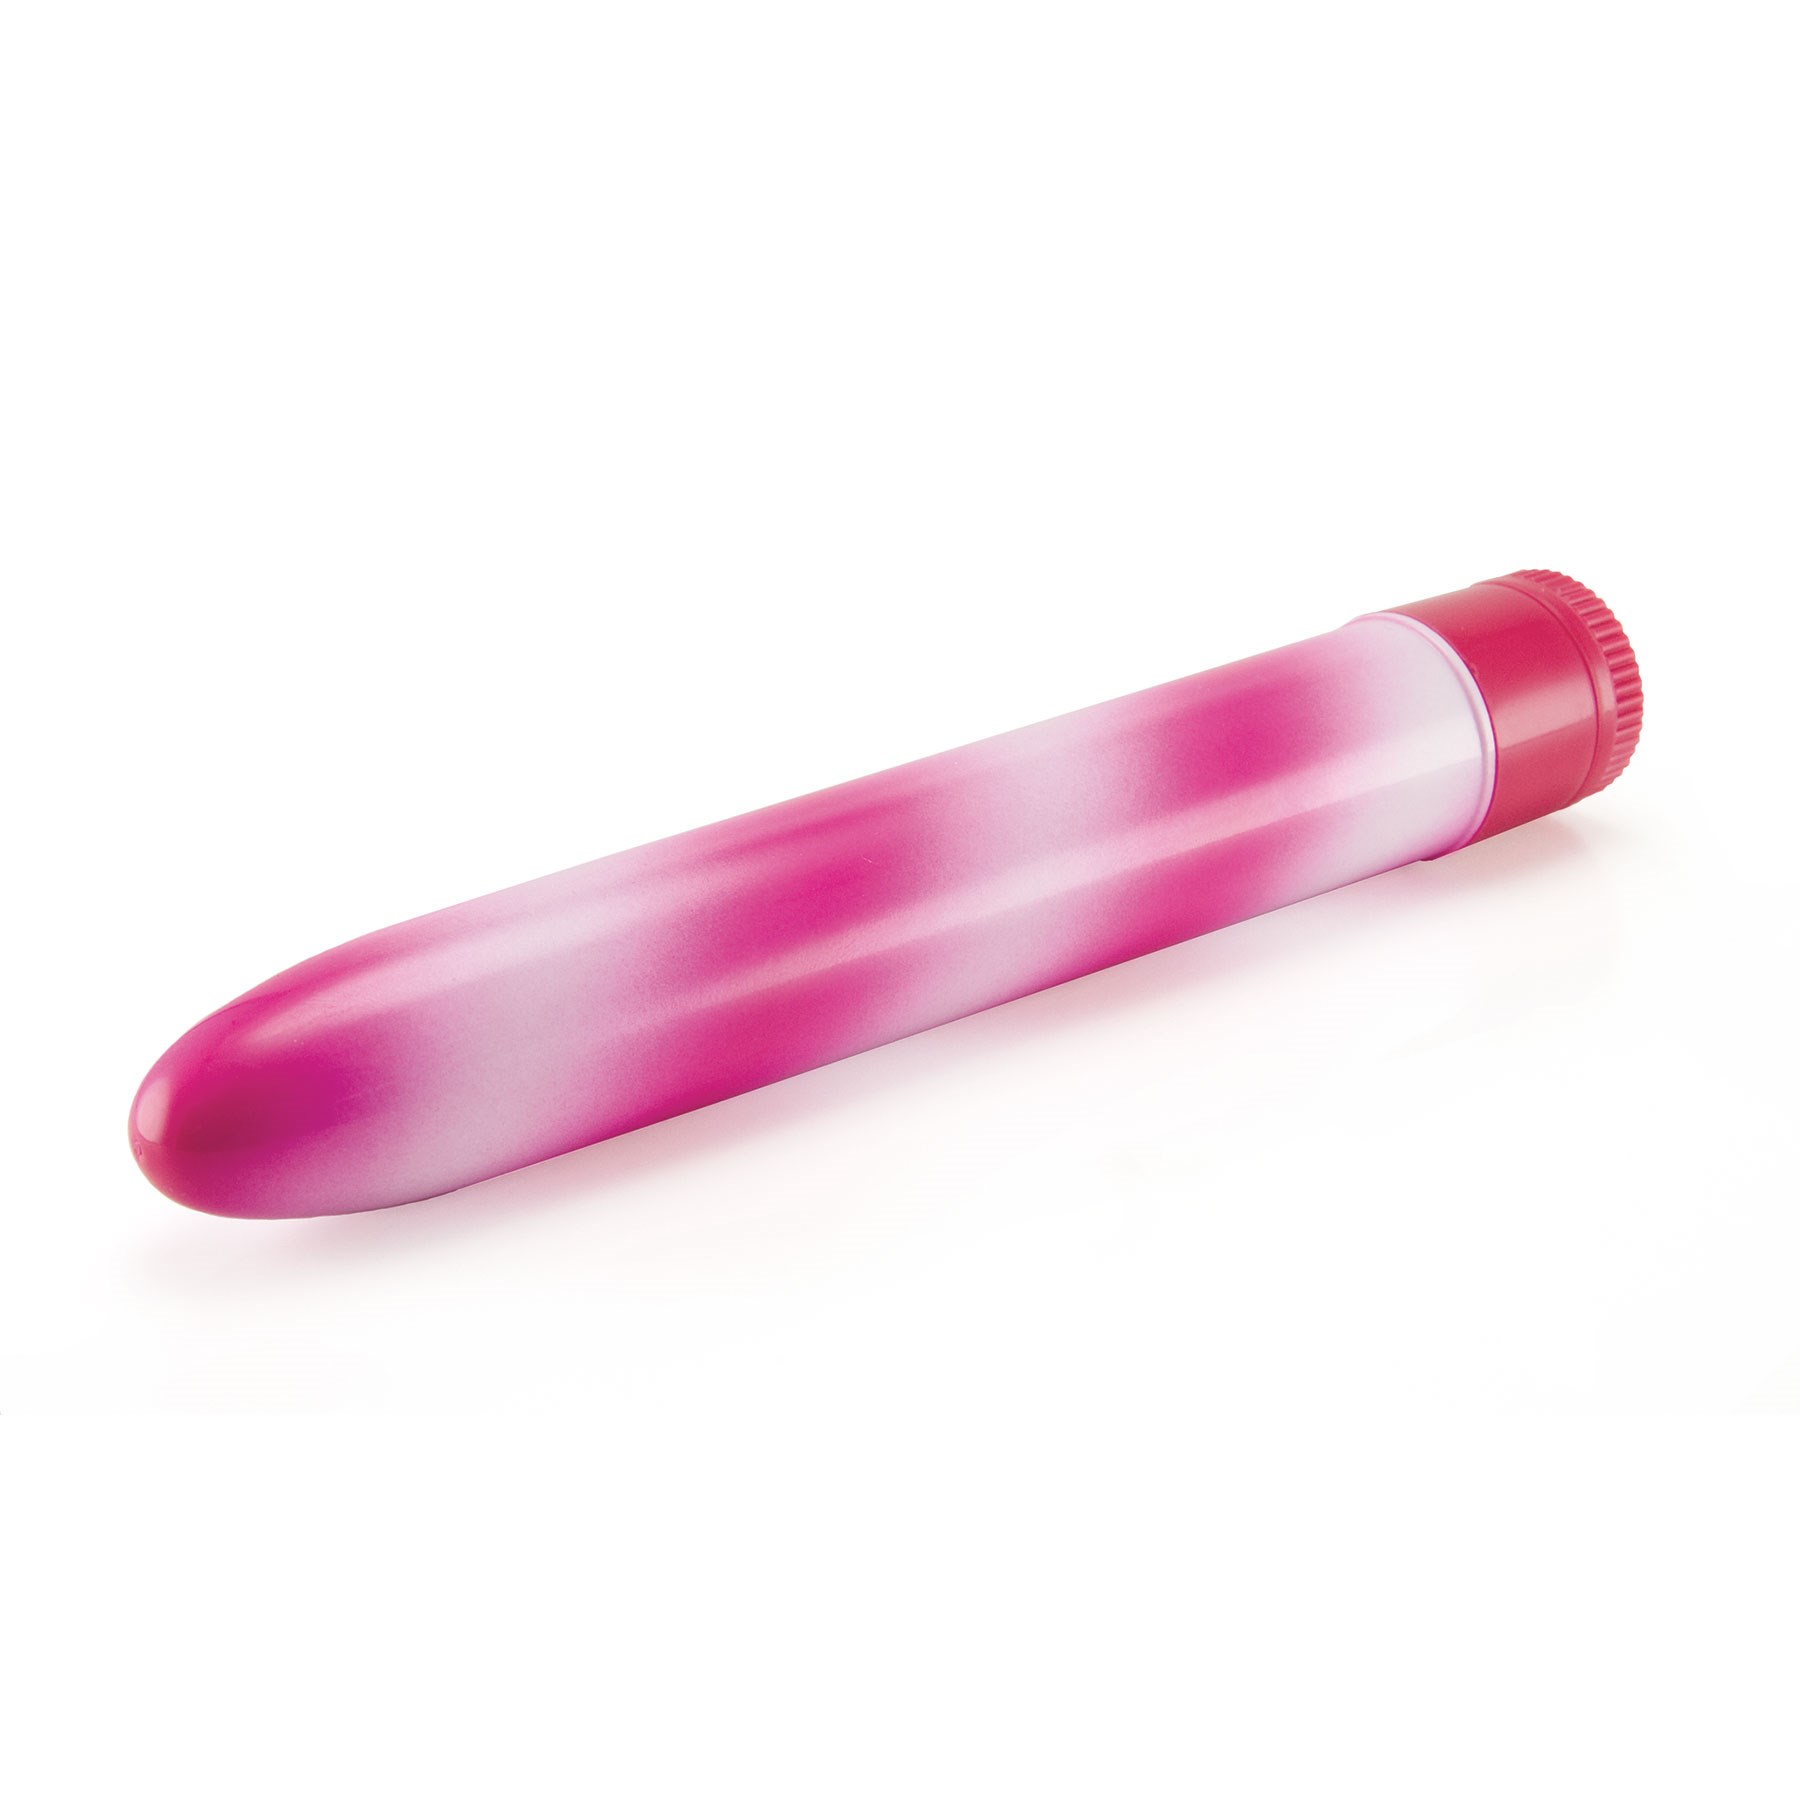 Candy Cane Waterproof Vibrator laying on table